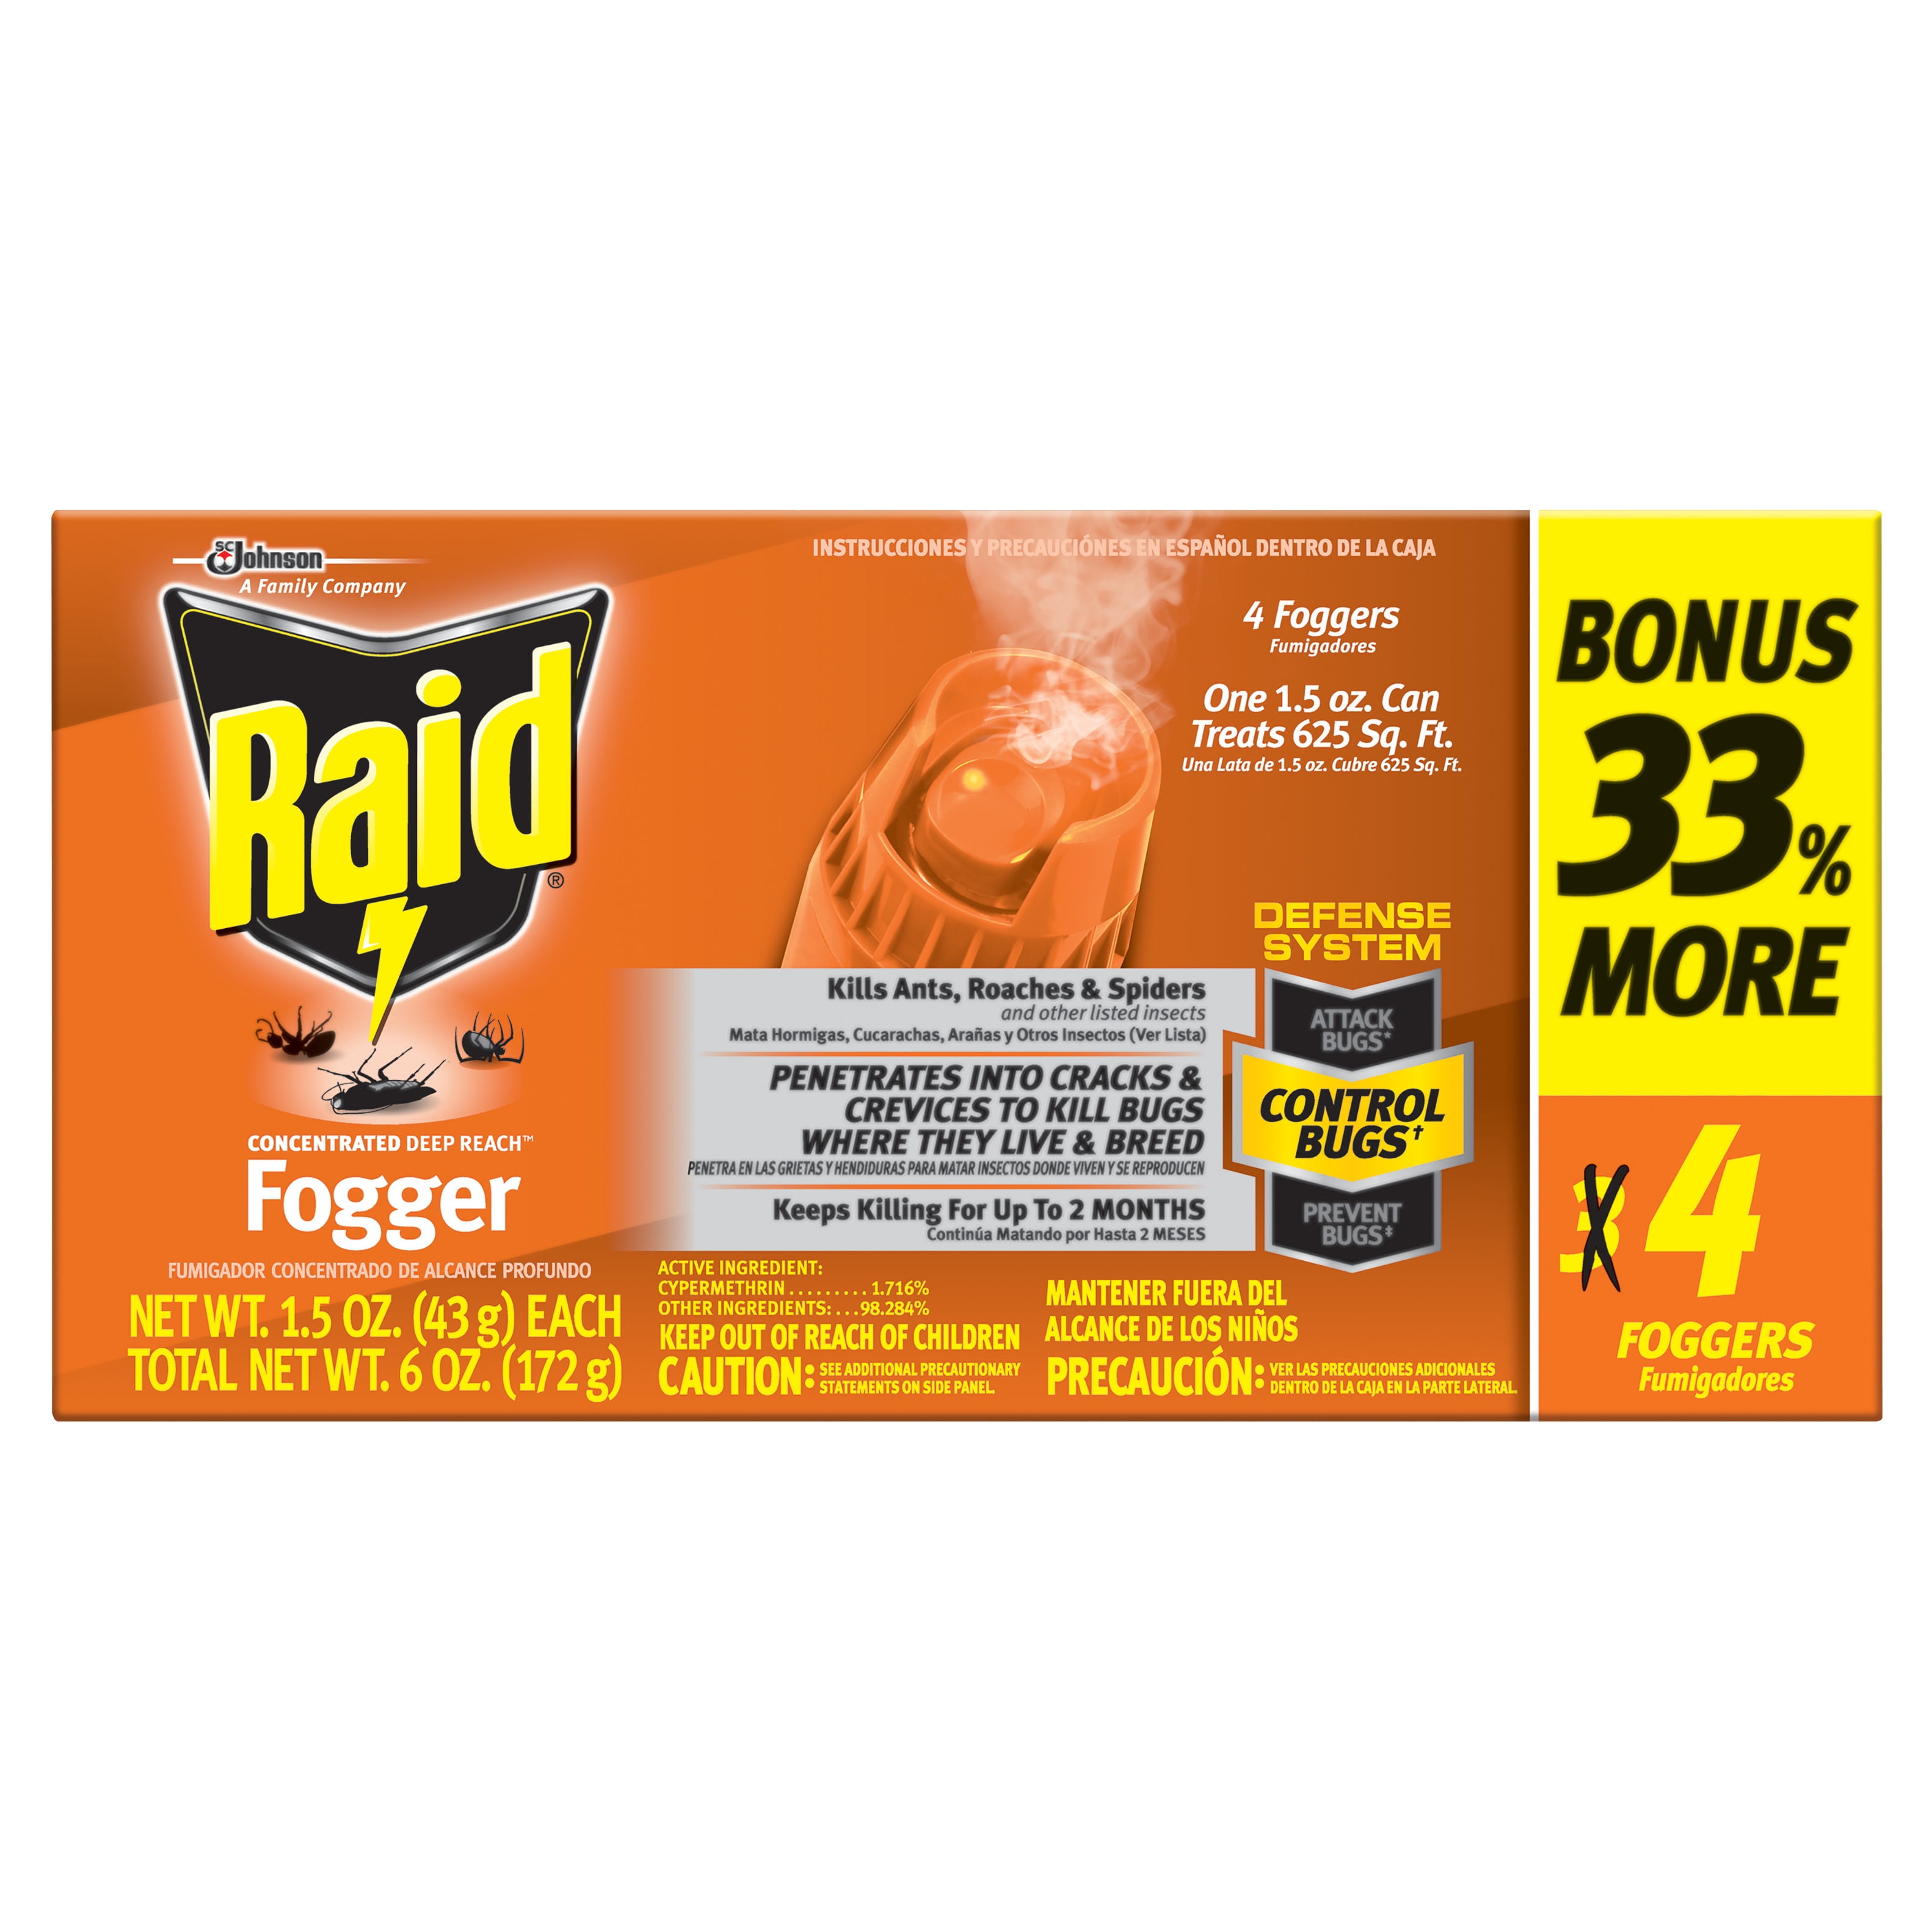 What is better, Raid Fogger or Raid Fumigator, or can they be used at the same time?